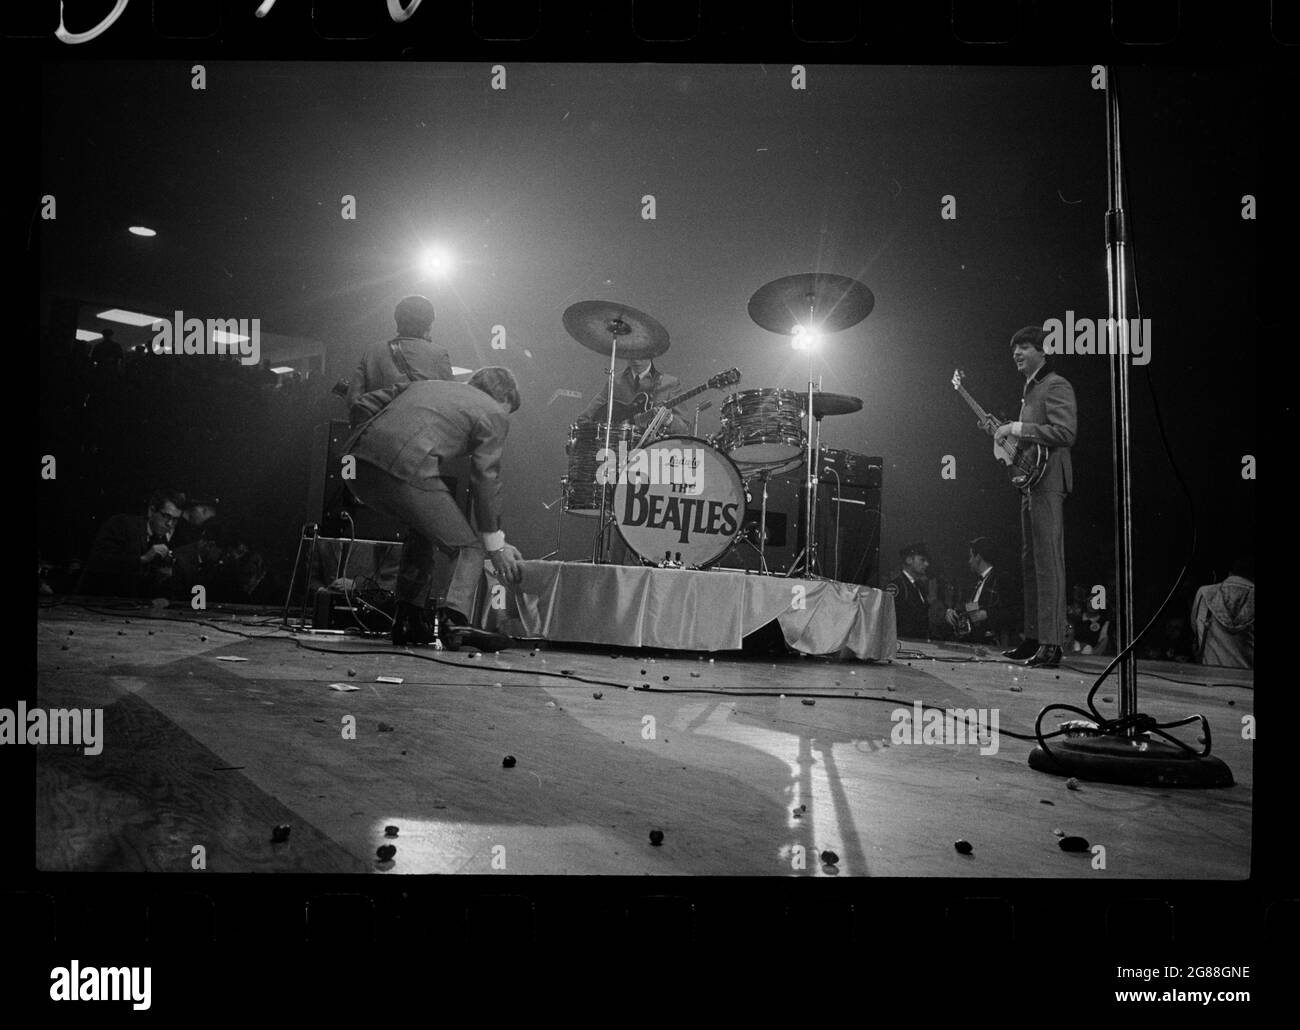 The Beatles on stage – British Rock and Roll group at the Washington Coliseum. February 11th 1964. Trikosko, Marion S., photographer. Stock Photo